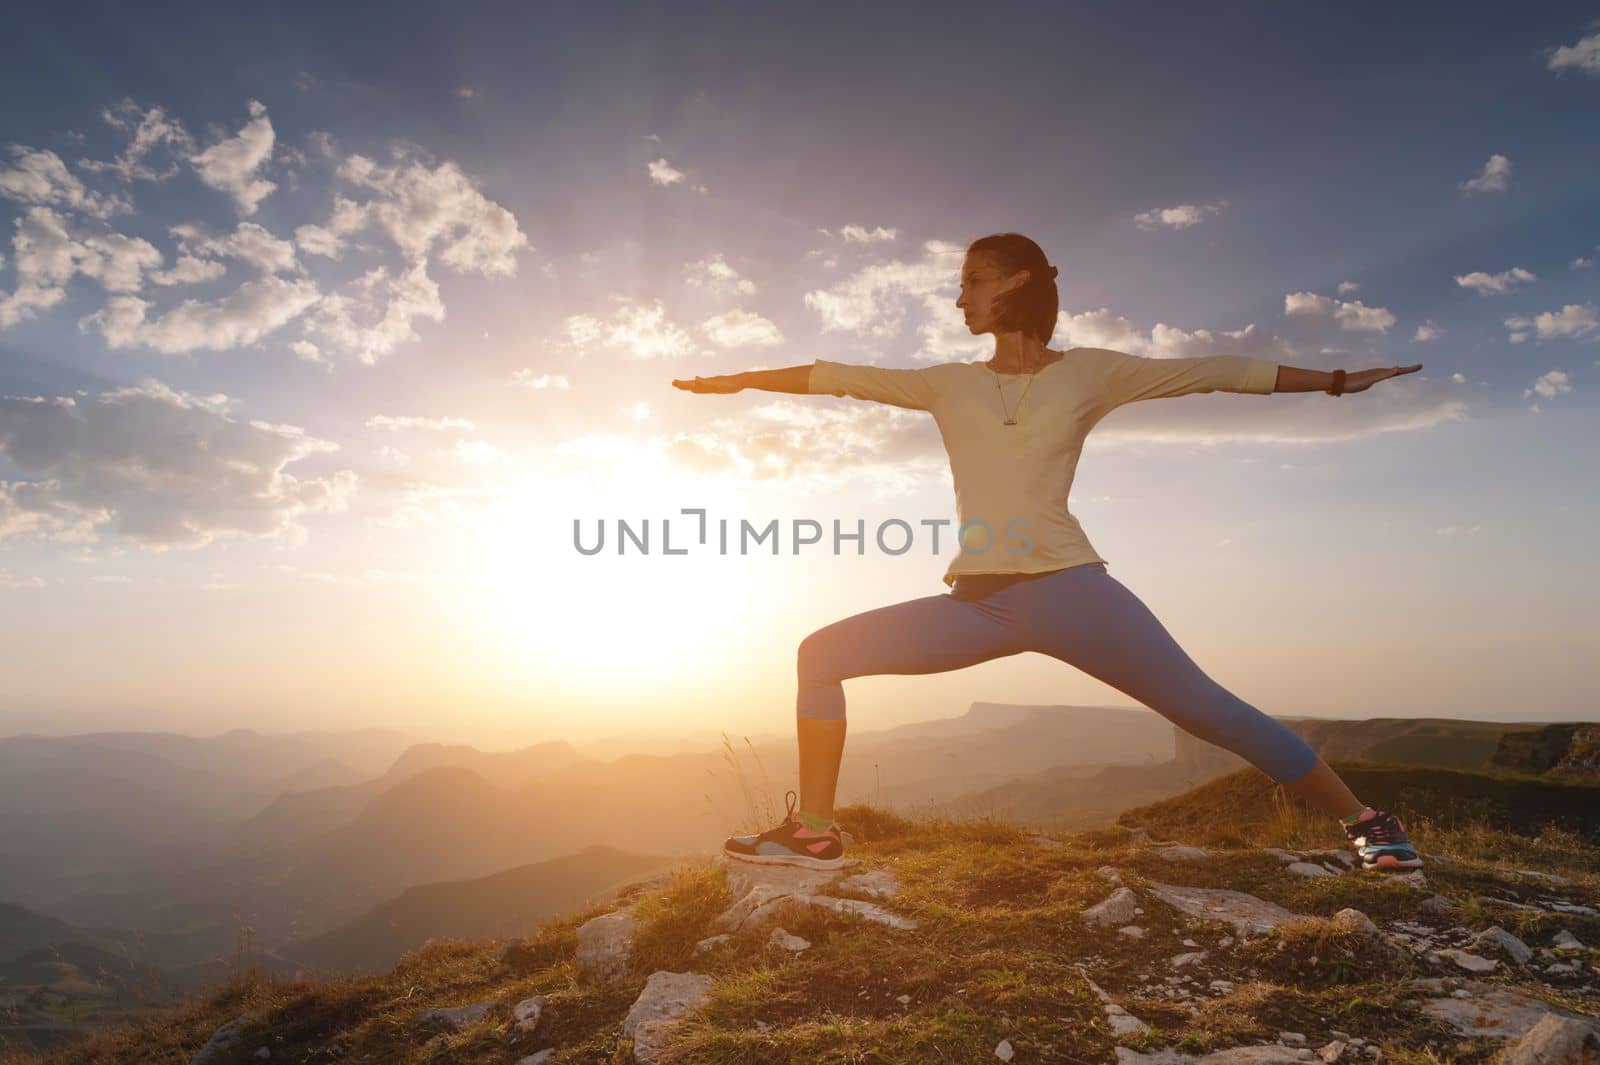 Young woman in warrior yoga pose standing on mountain rock under beautiful cloudy sky.